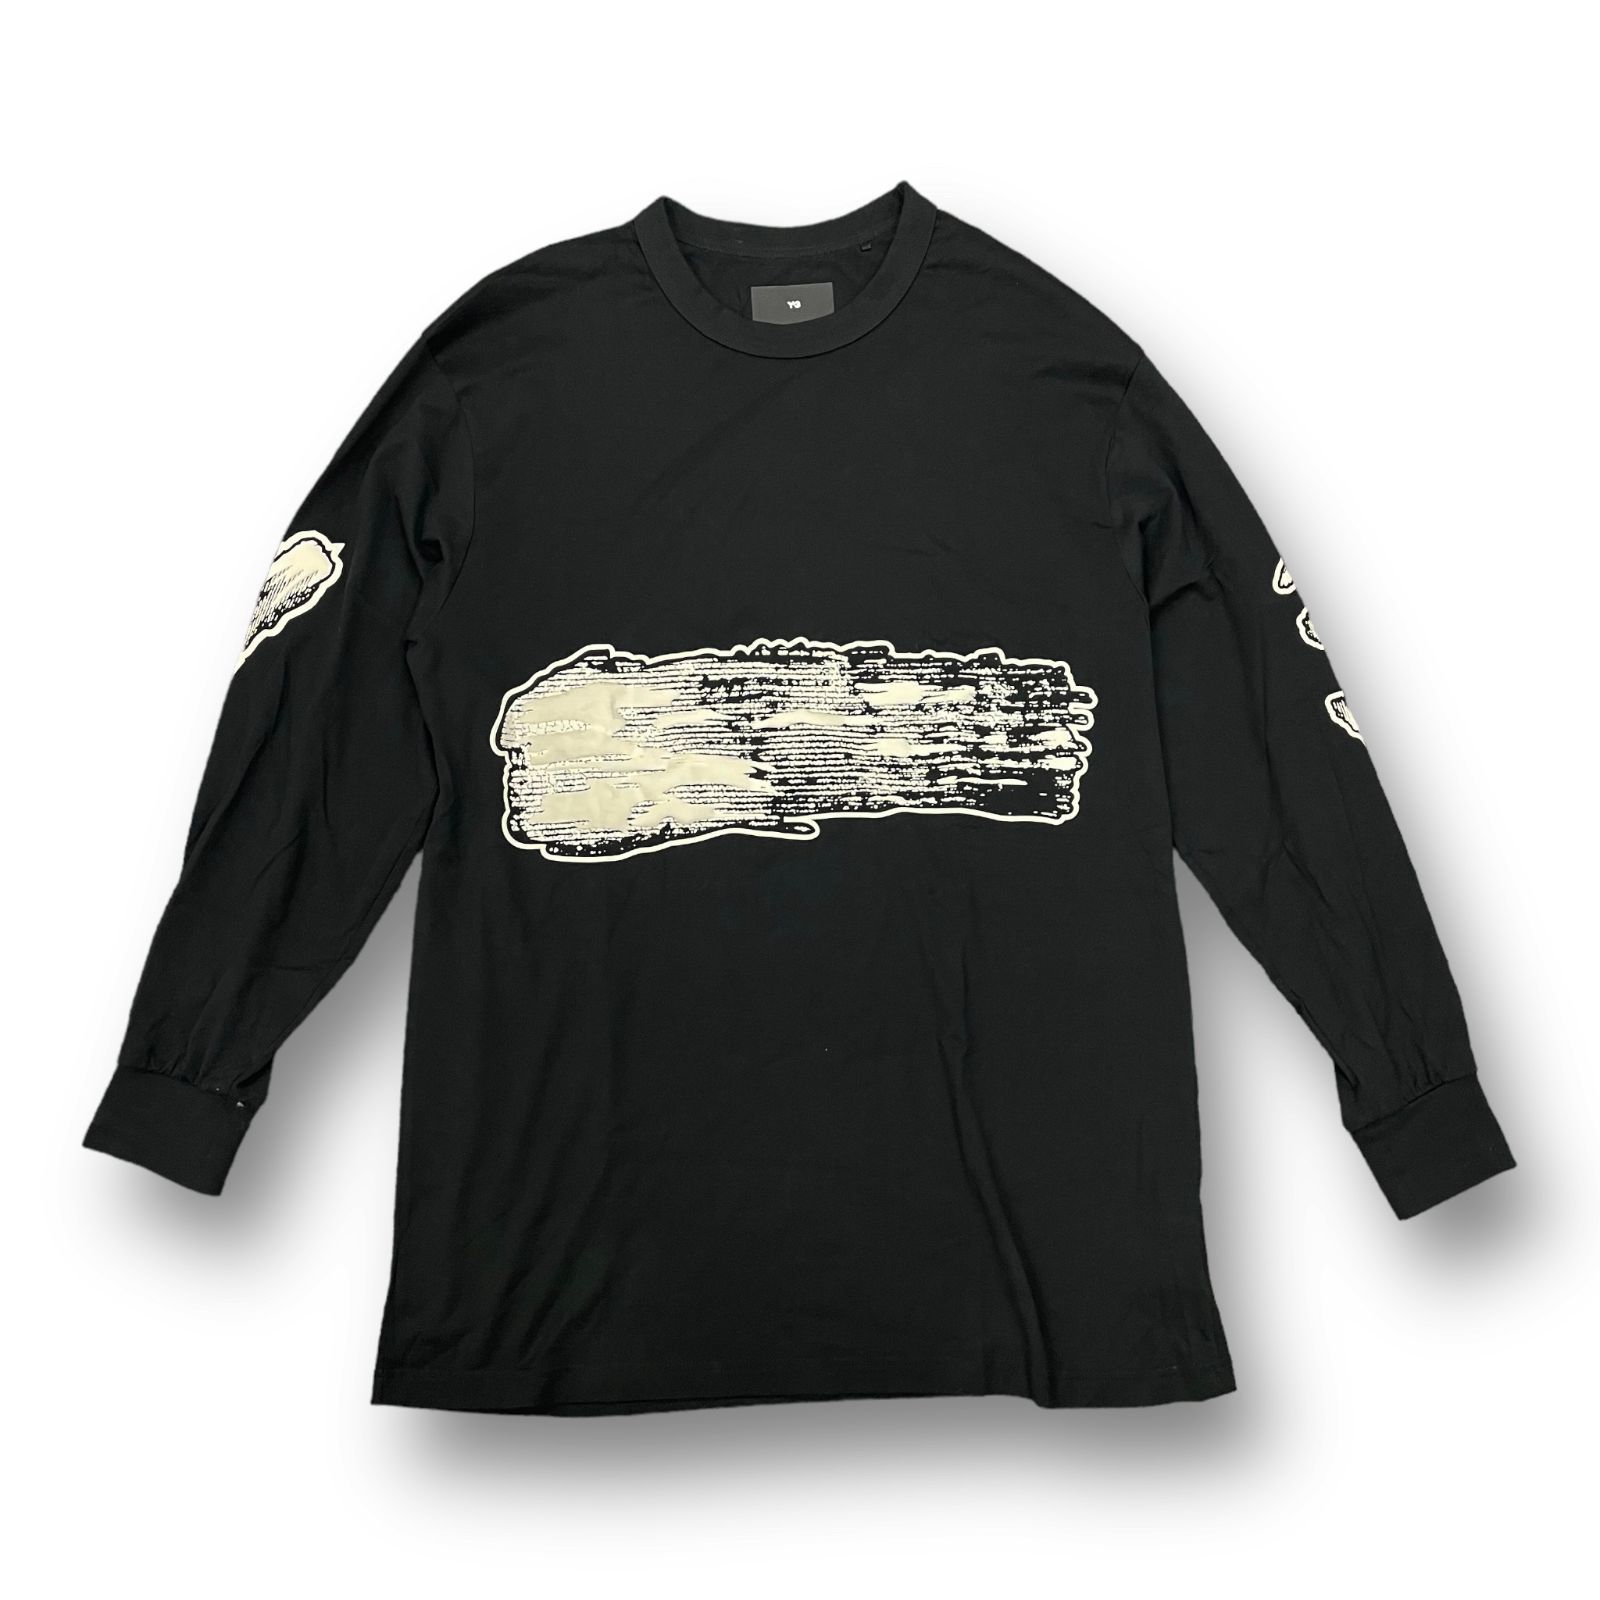 Y-3 23SS GRAPHIC LOGO LONG SLEEVE TEE グラフィック プリント クルーネック カットソー Tシャツ ワイスリー XS